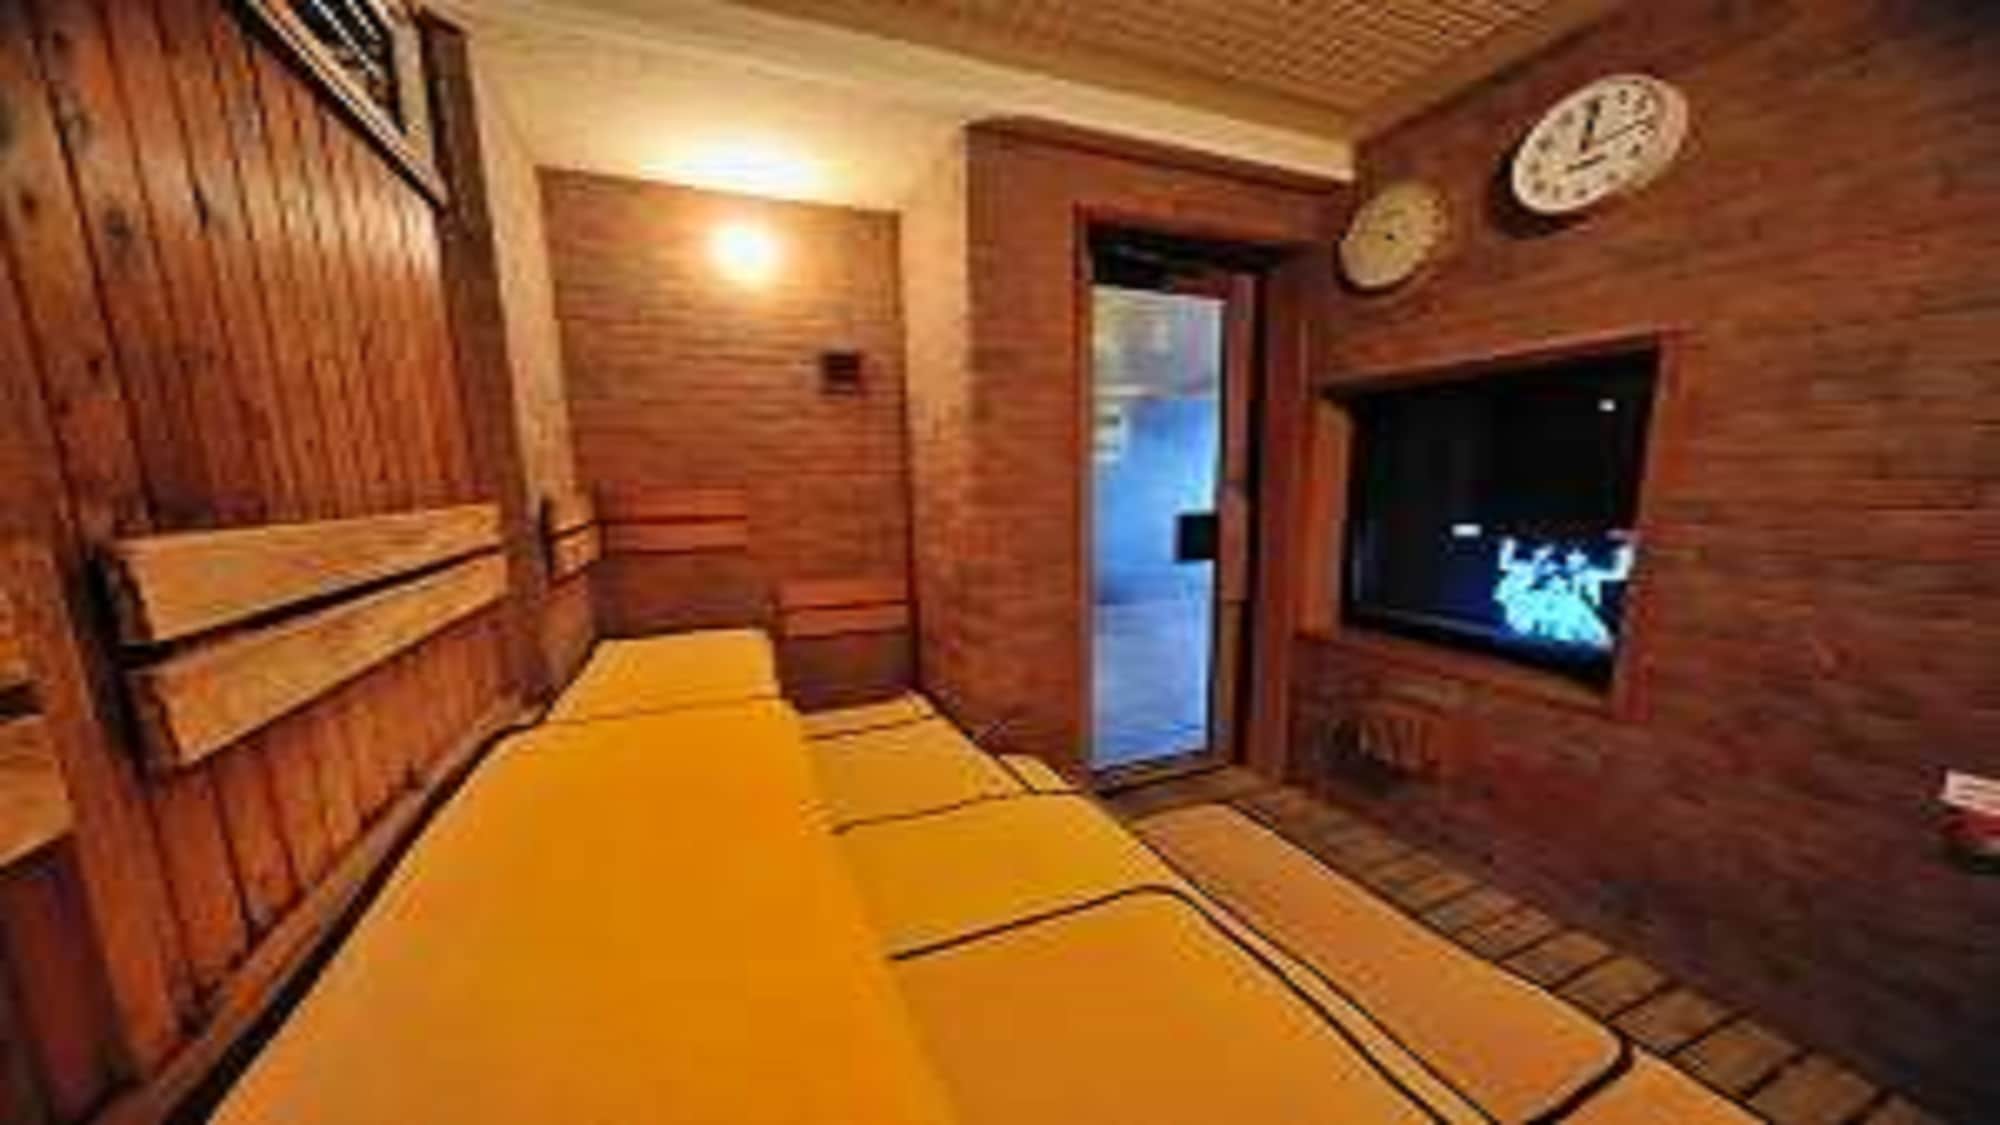 ■ [Men] Large communal bath High temperature sauna 15:00 to 1:00 the next day, 5:00 to 10:00 (capacity 4 people) Room temperature 96 ℃